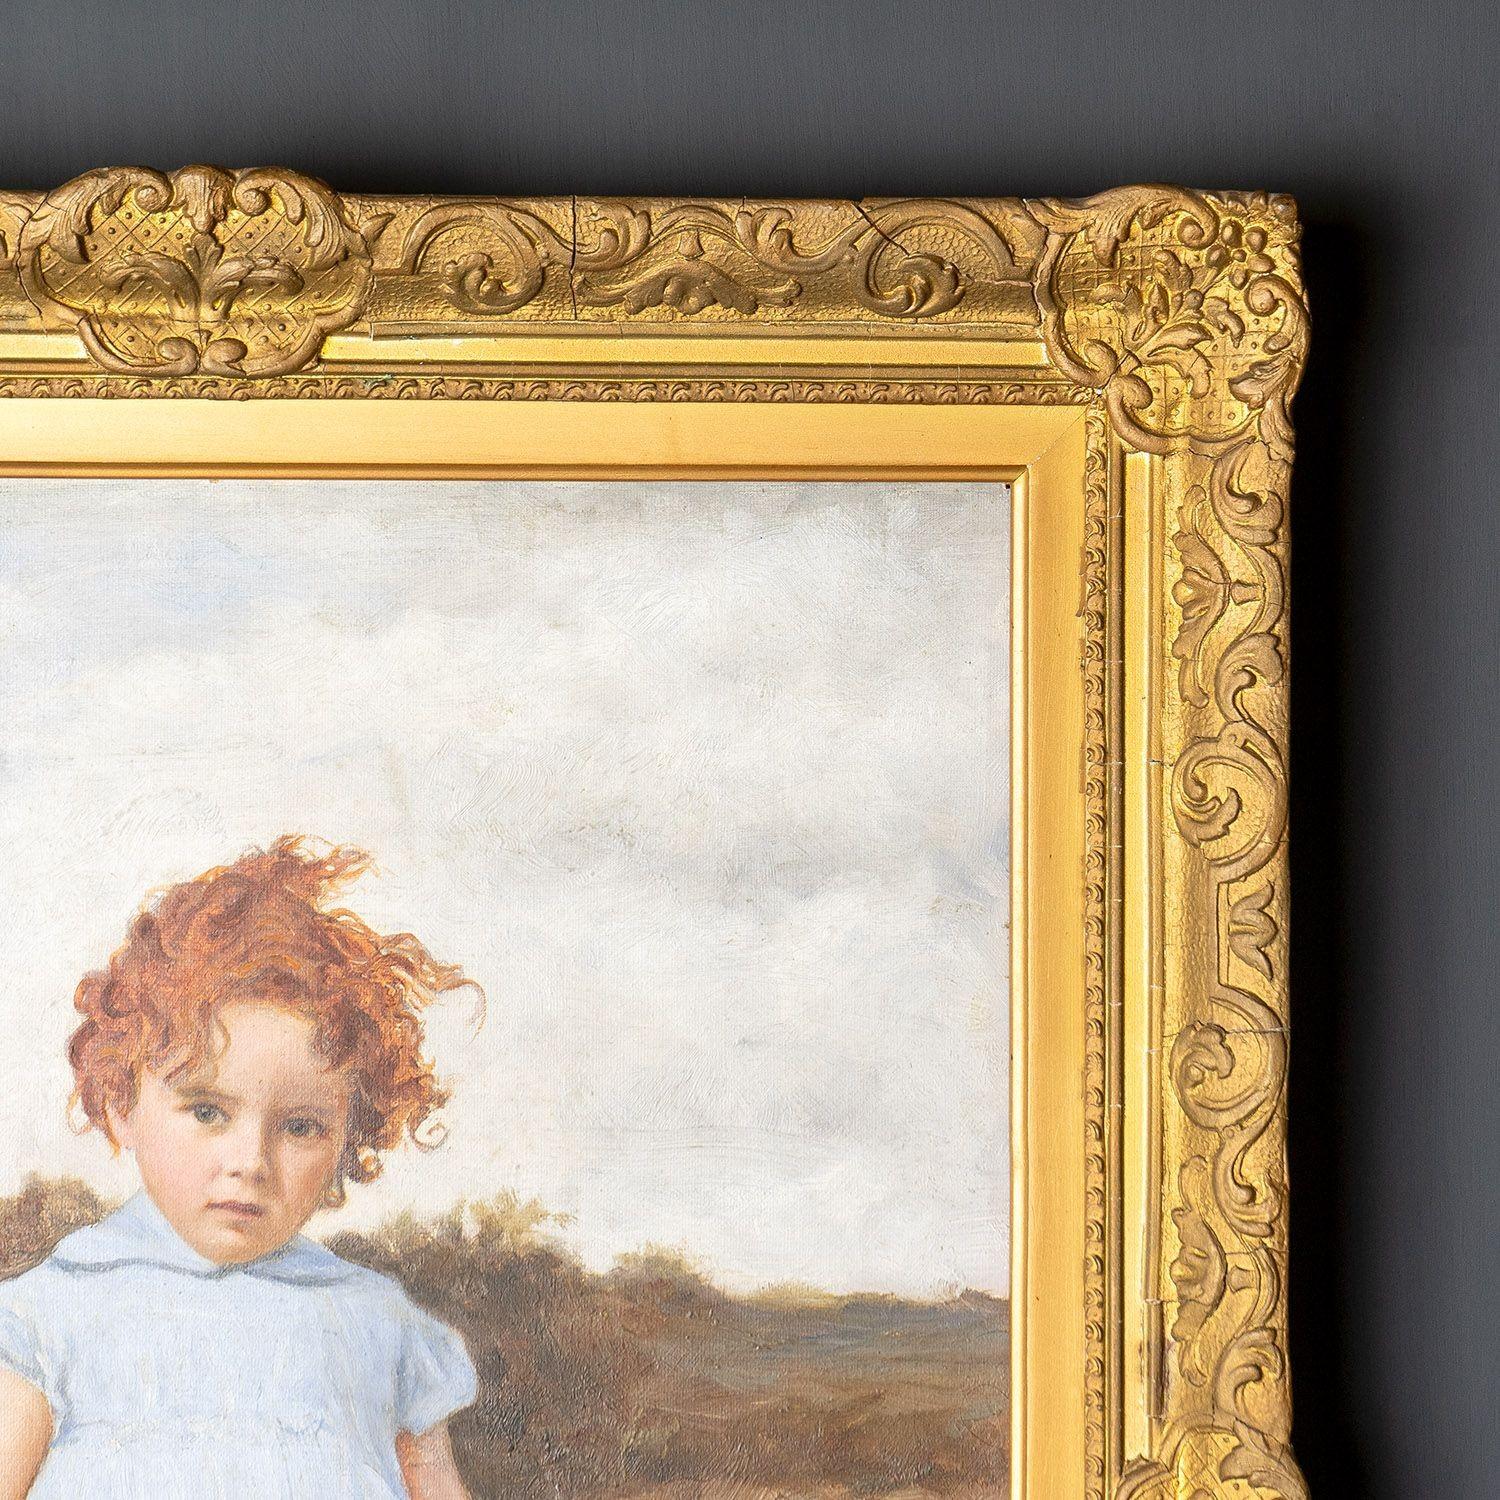 Antique Original Oil Painting
Depicting a young red-headed girl on blustery heathland. There is something about her, she is young with chubby, ruddy legs and cheeks but there is a real strength and defiance in her.
 
The painting is unsigned but is